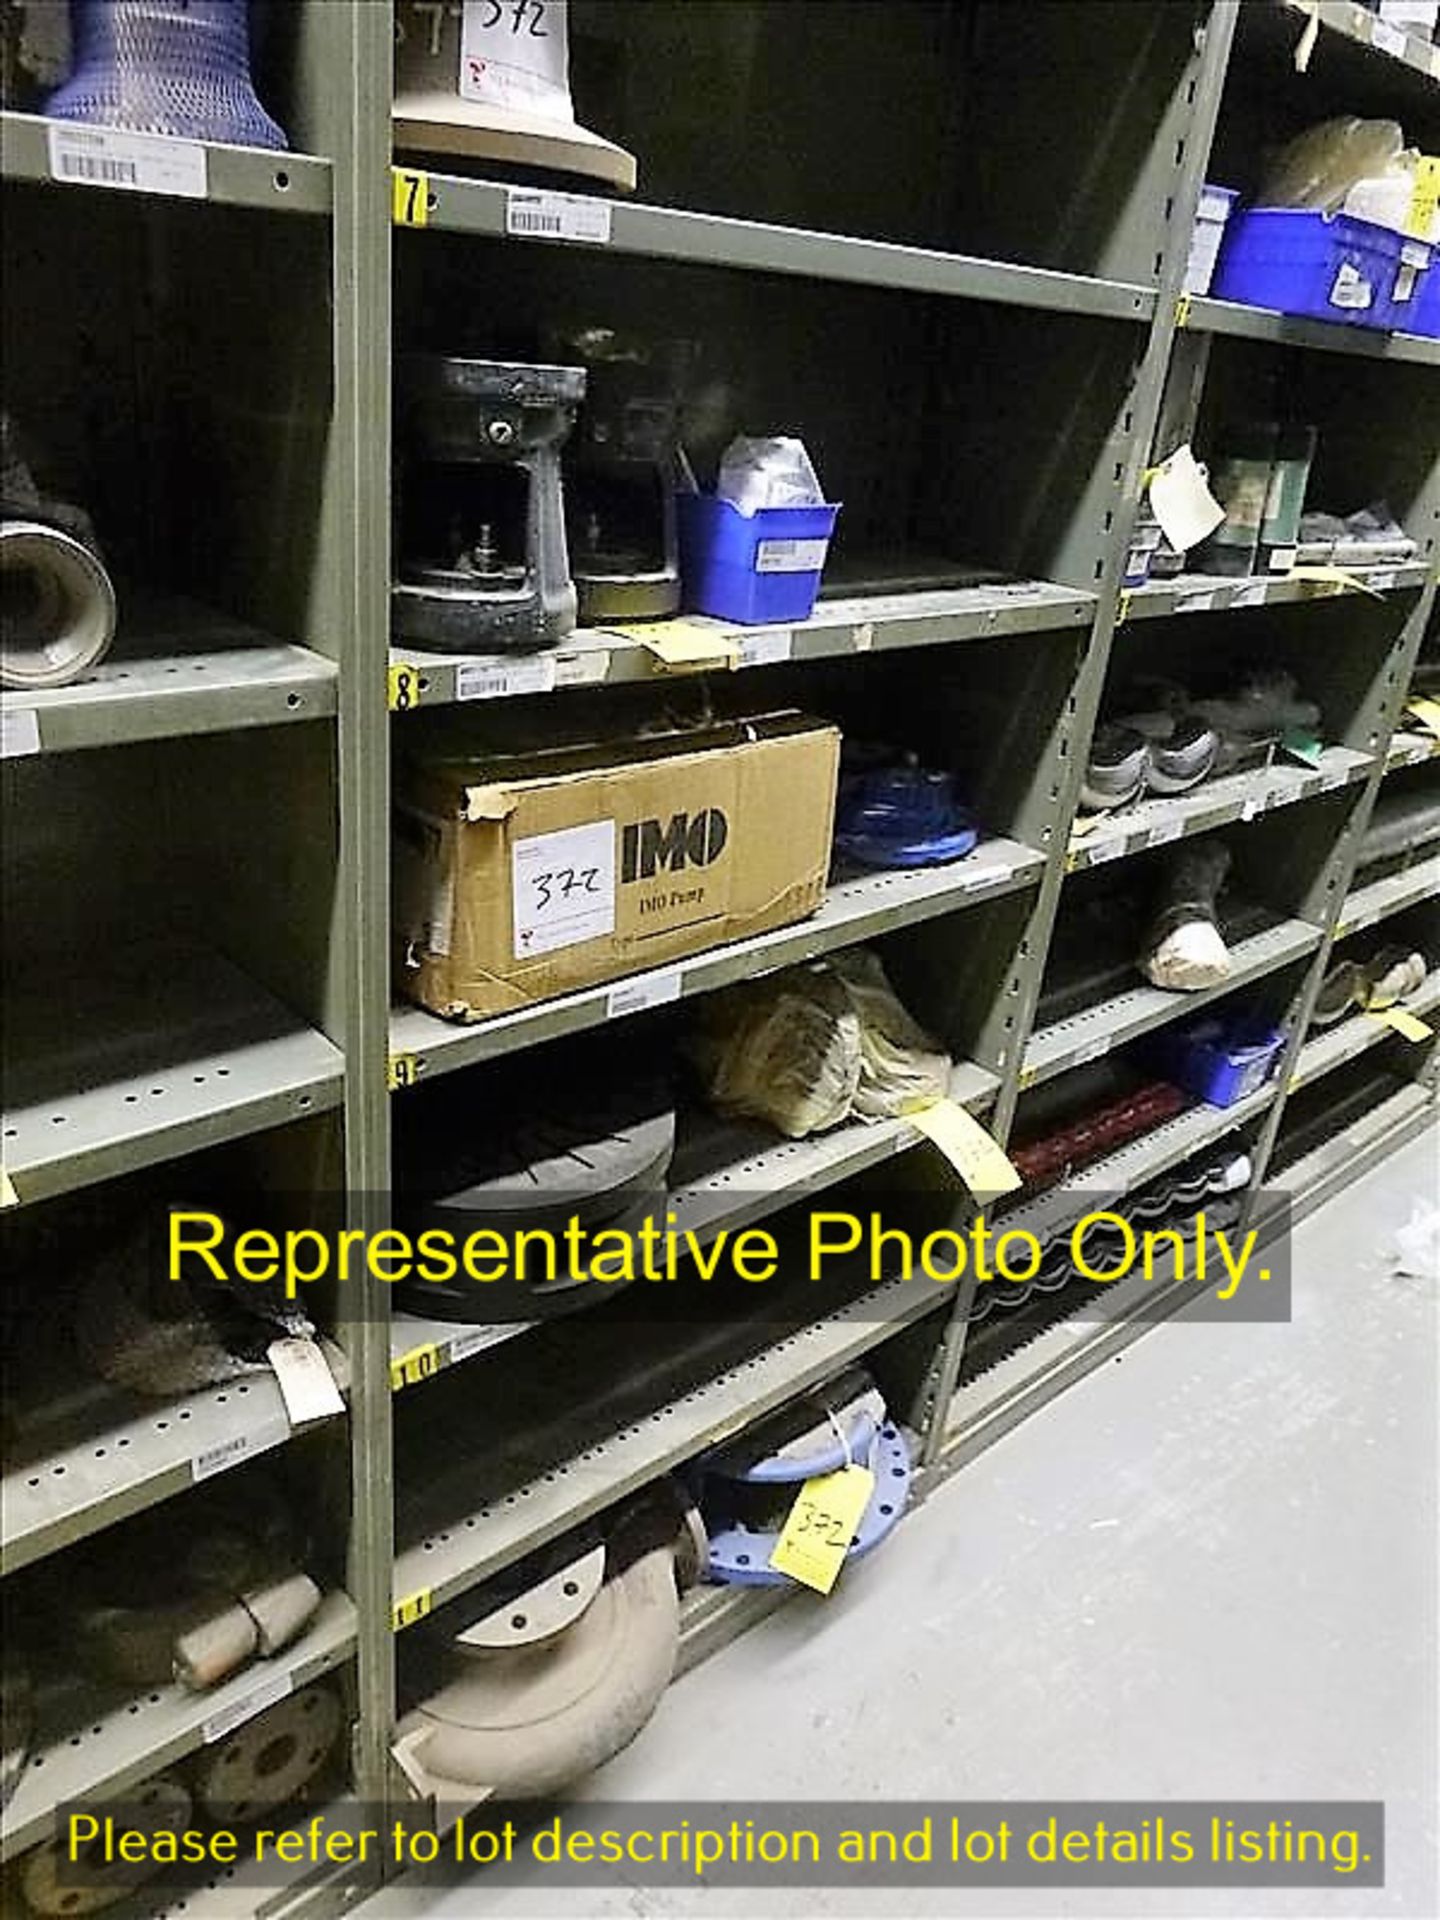 misc. pump parts, etc. (please see attached for detailed lot list. NOTE: quantities are